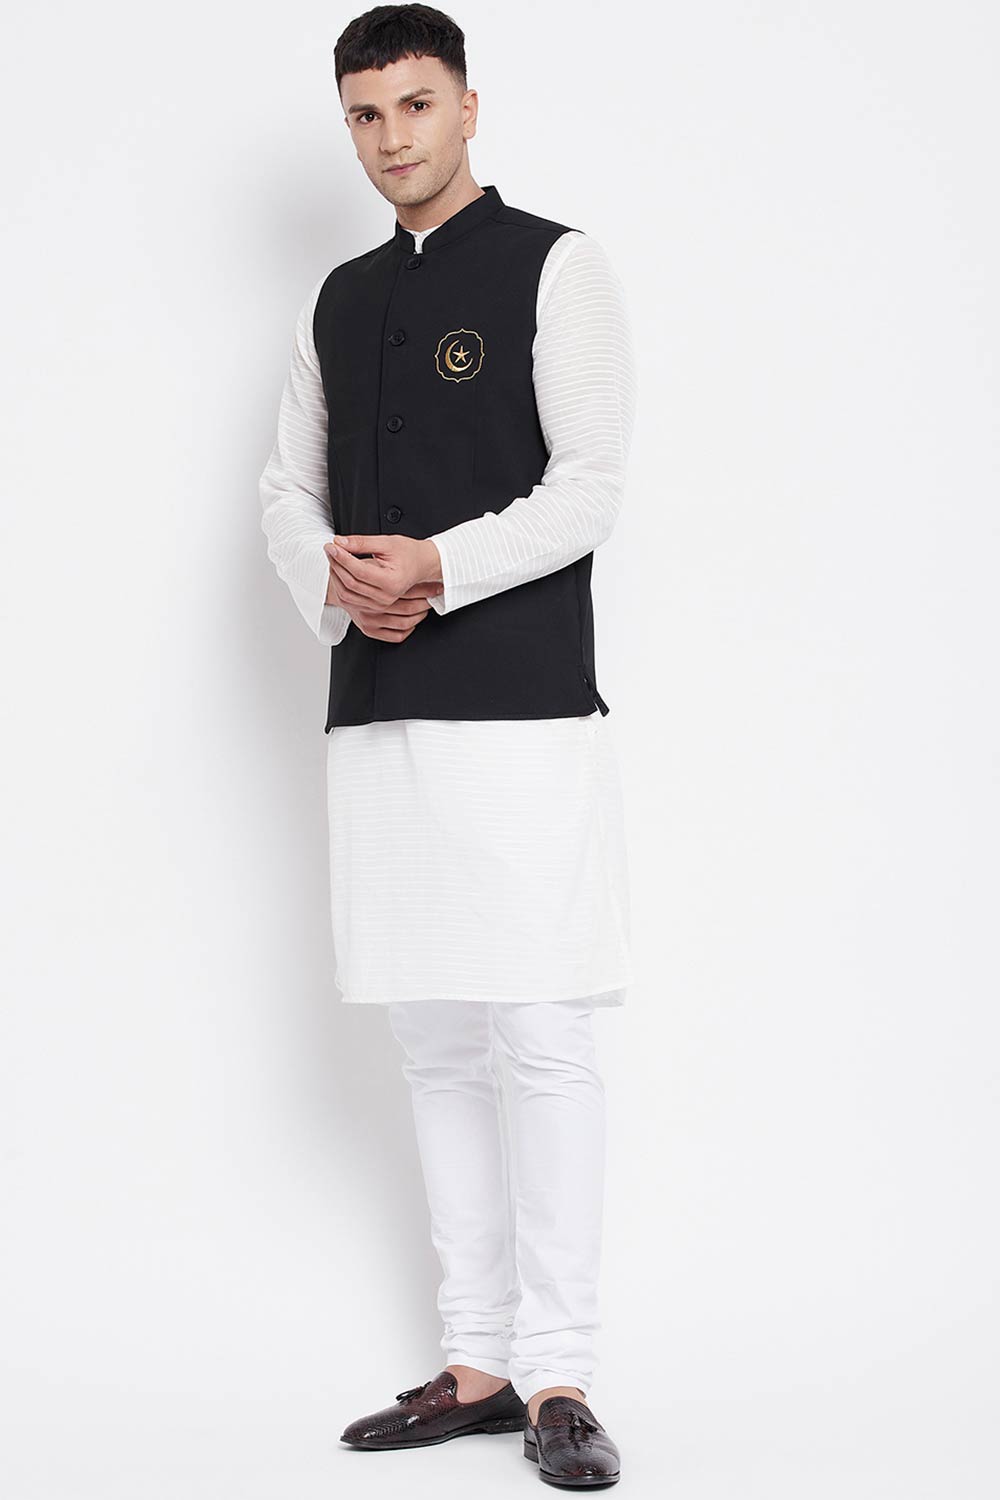 Buy Men's Merino Moon and Star Embroidery Nehru Jacket in Black - Back